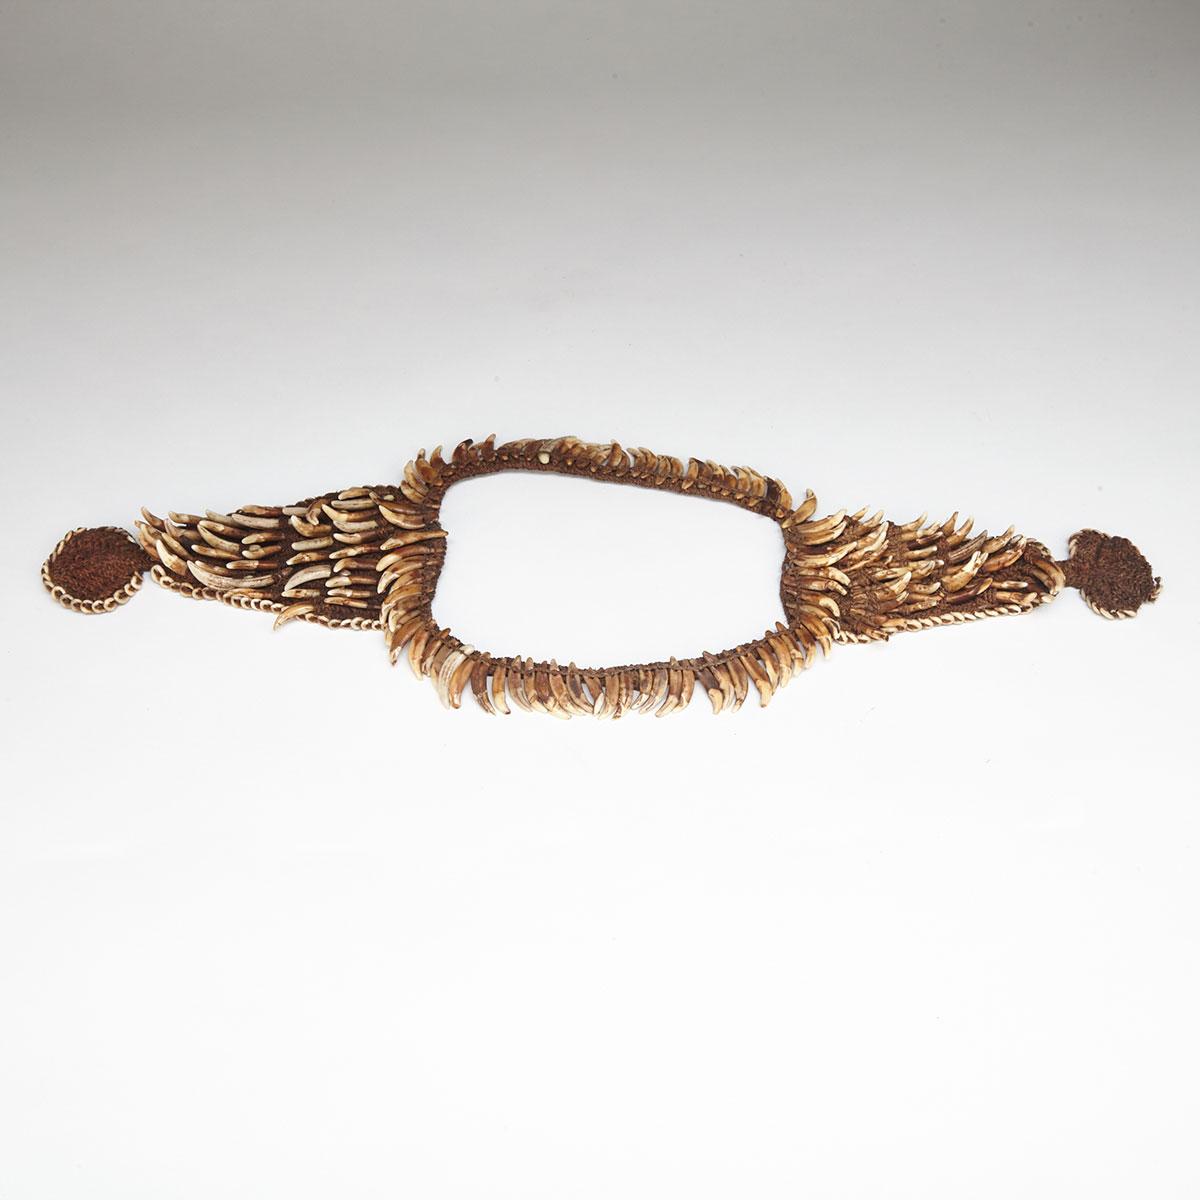 Papua New Guinea Dog Tooth Necklace, early-mid 20th century